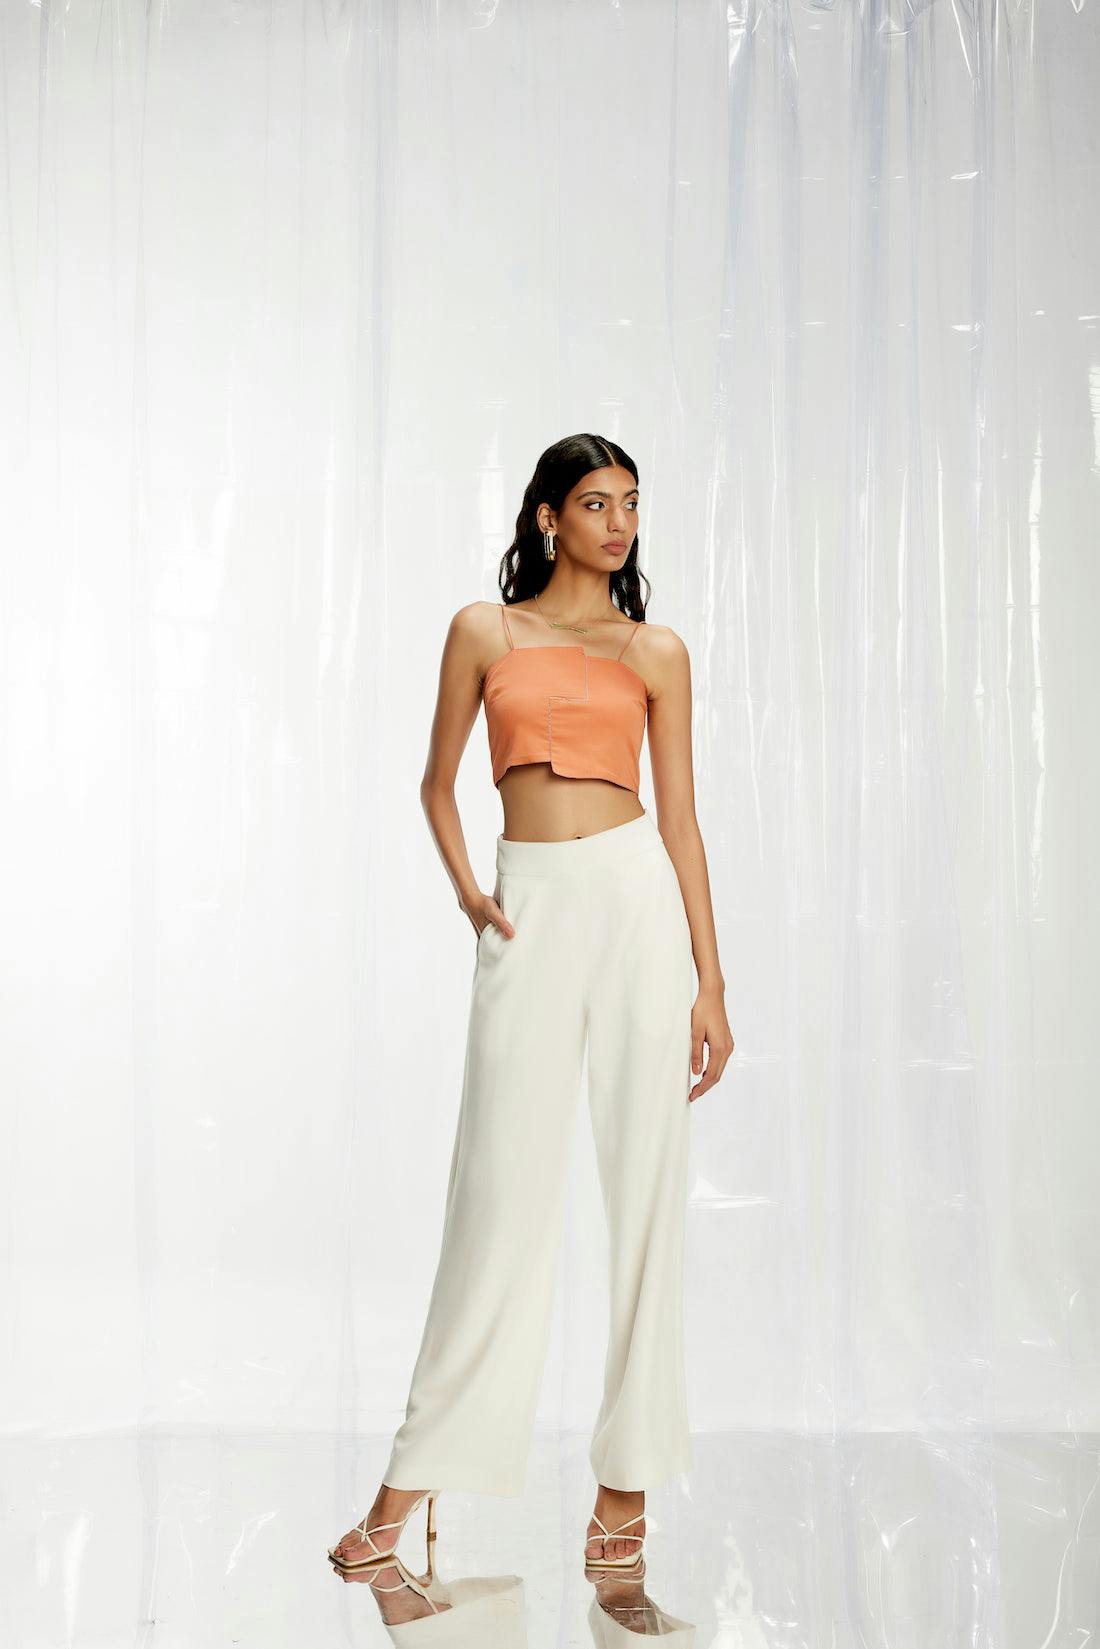 Powder White Wide Leg Pants, a product by Pocketful Of Cherrie